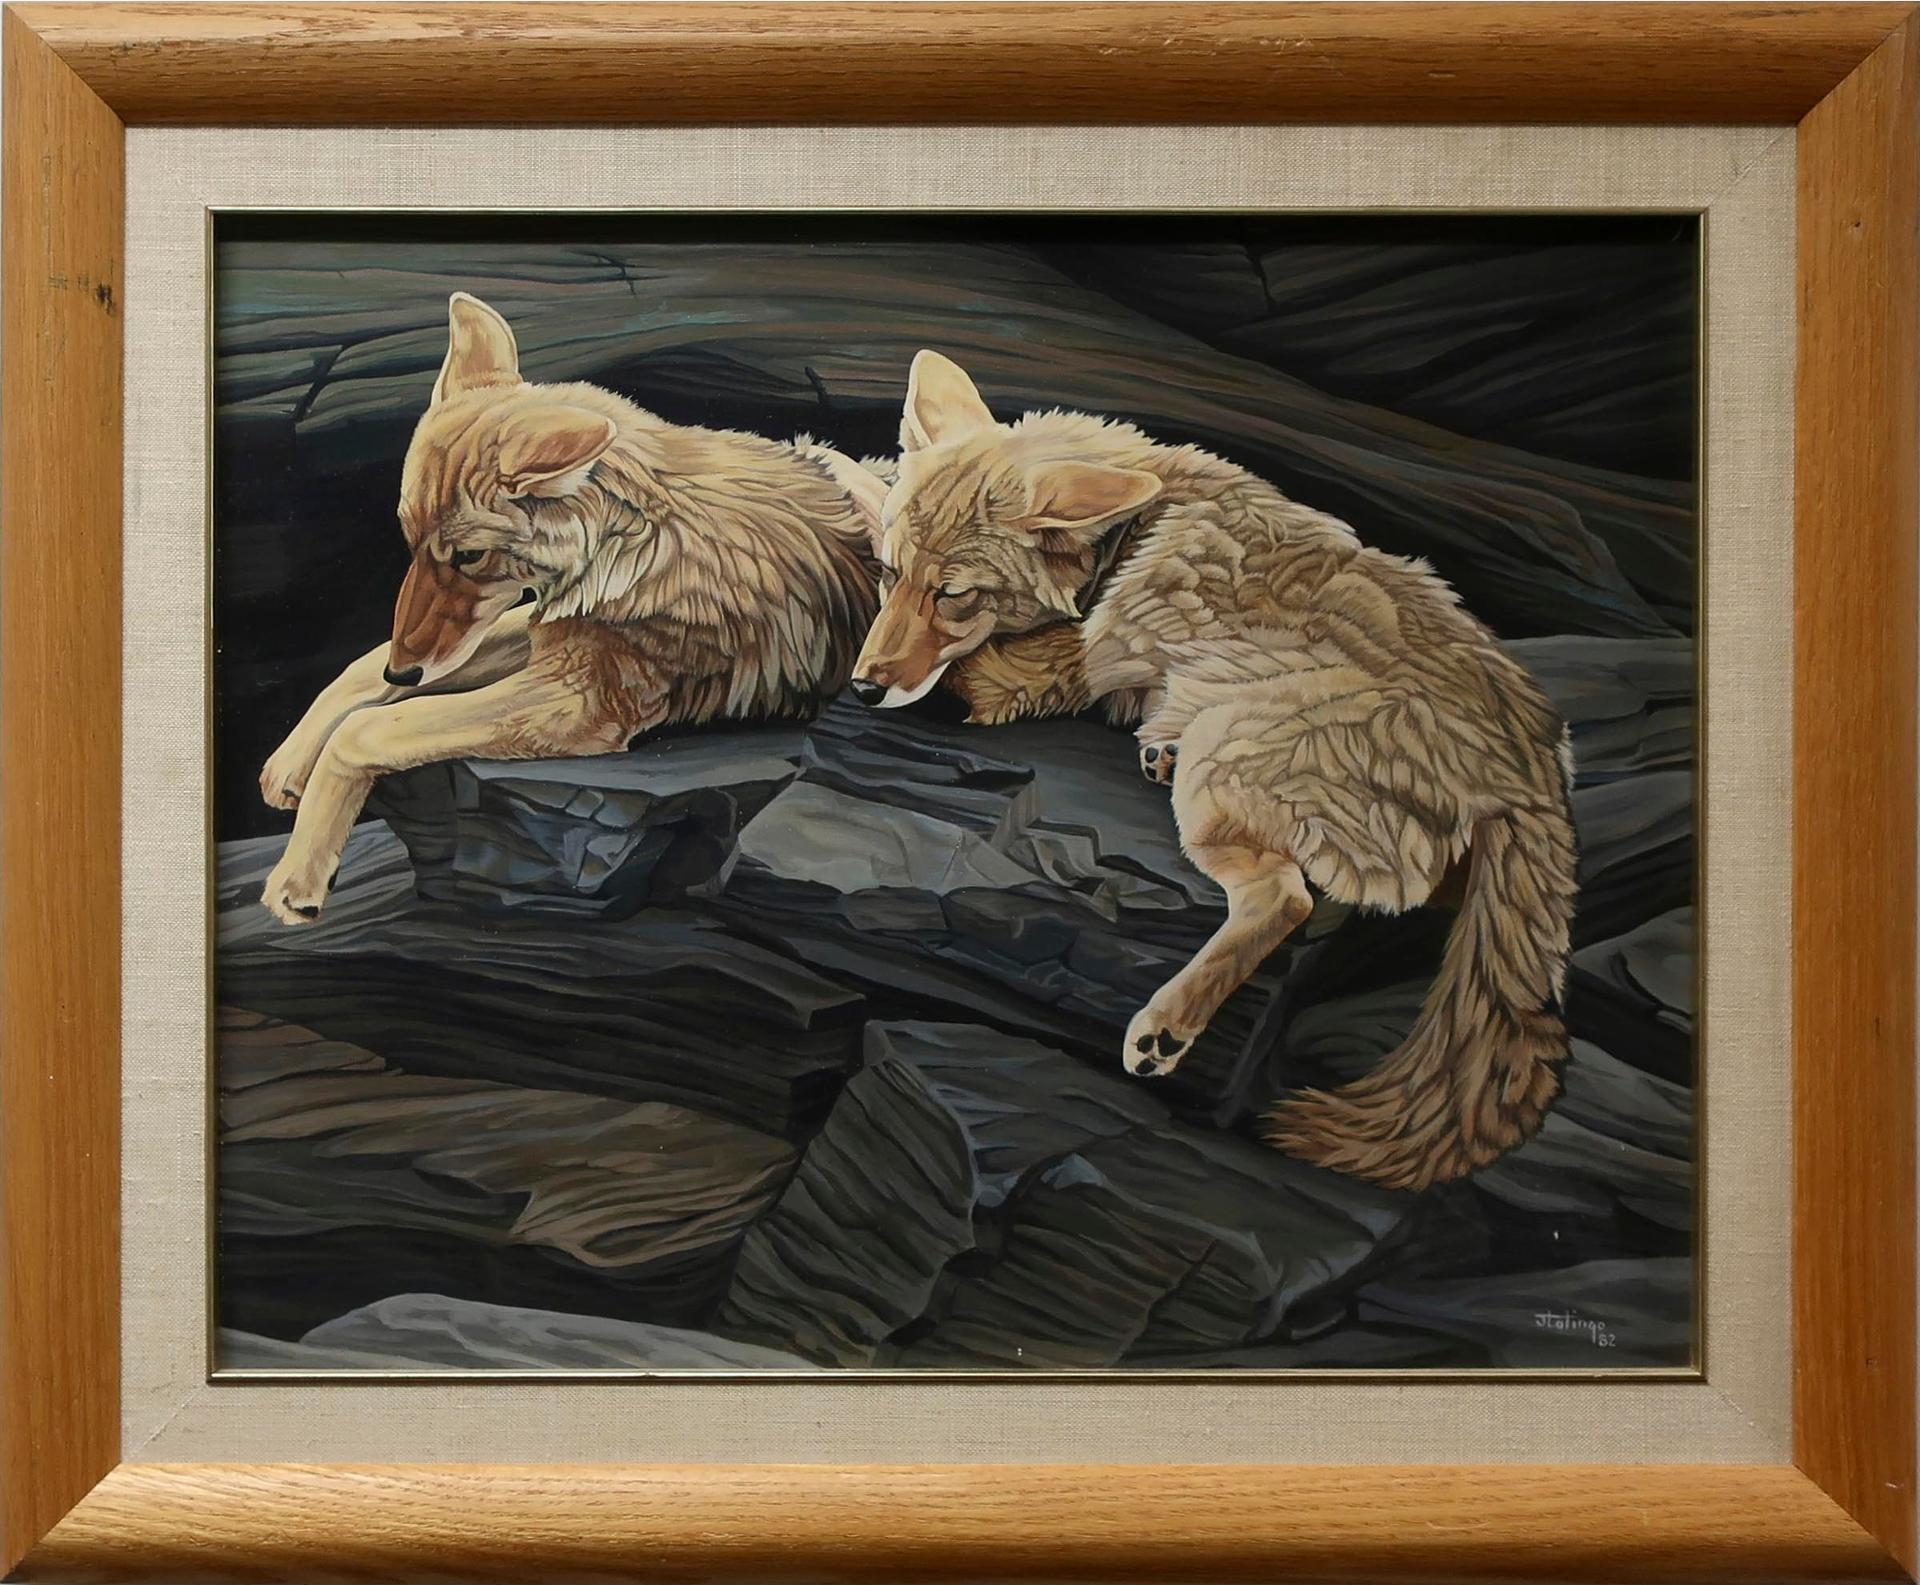 Judy Lalingo - Untitled (Coyotes At Rest)